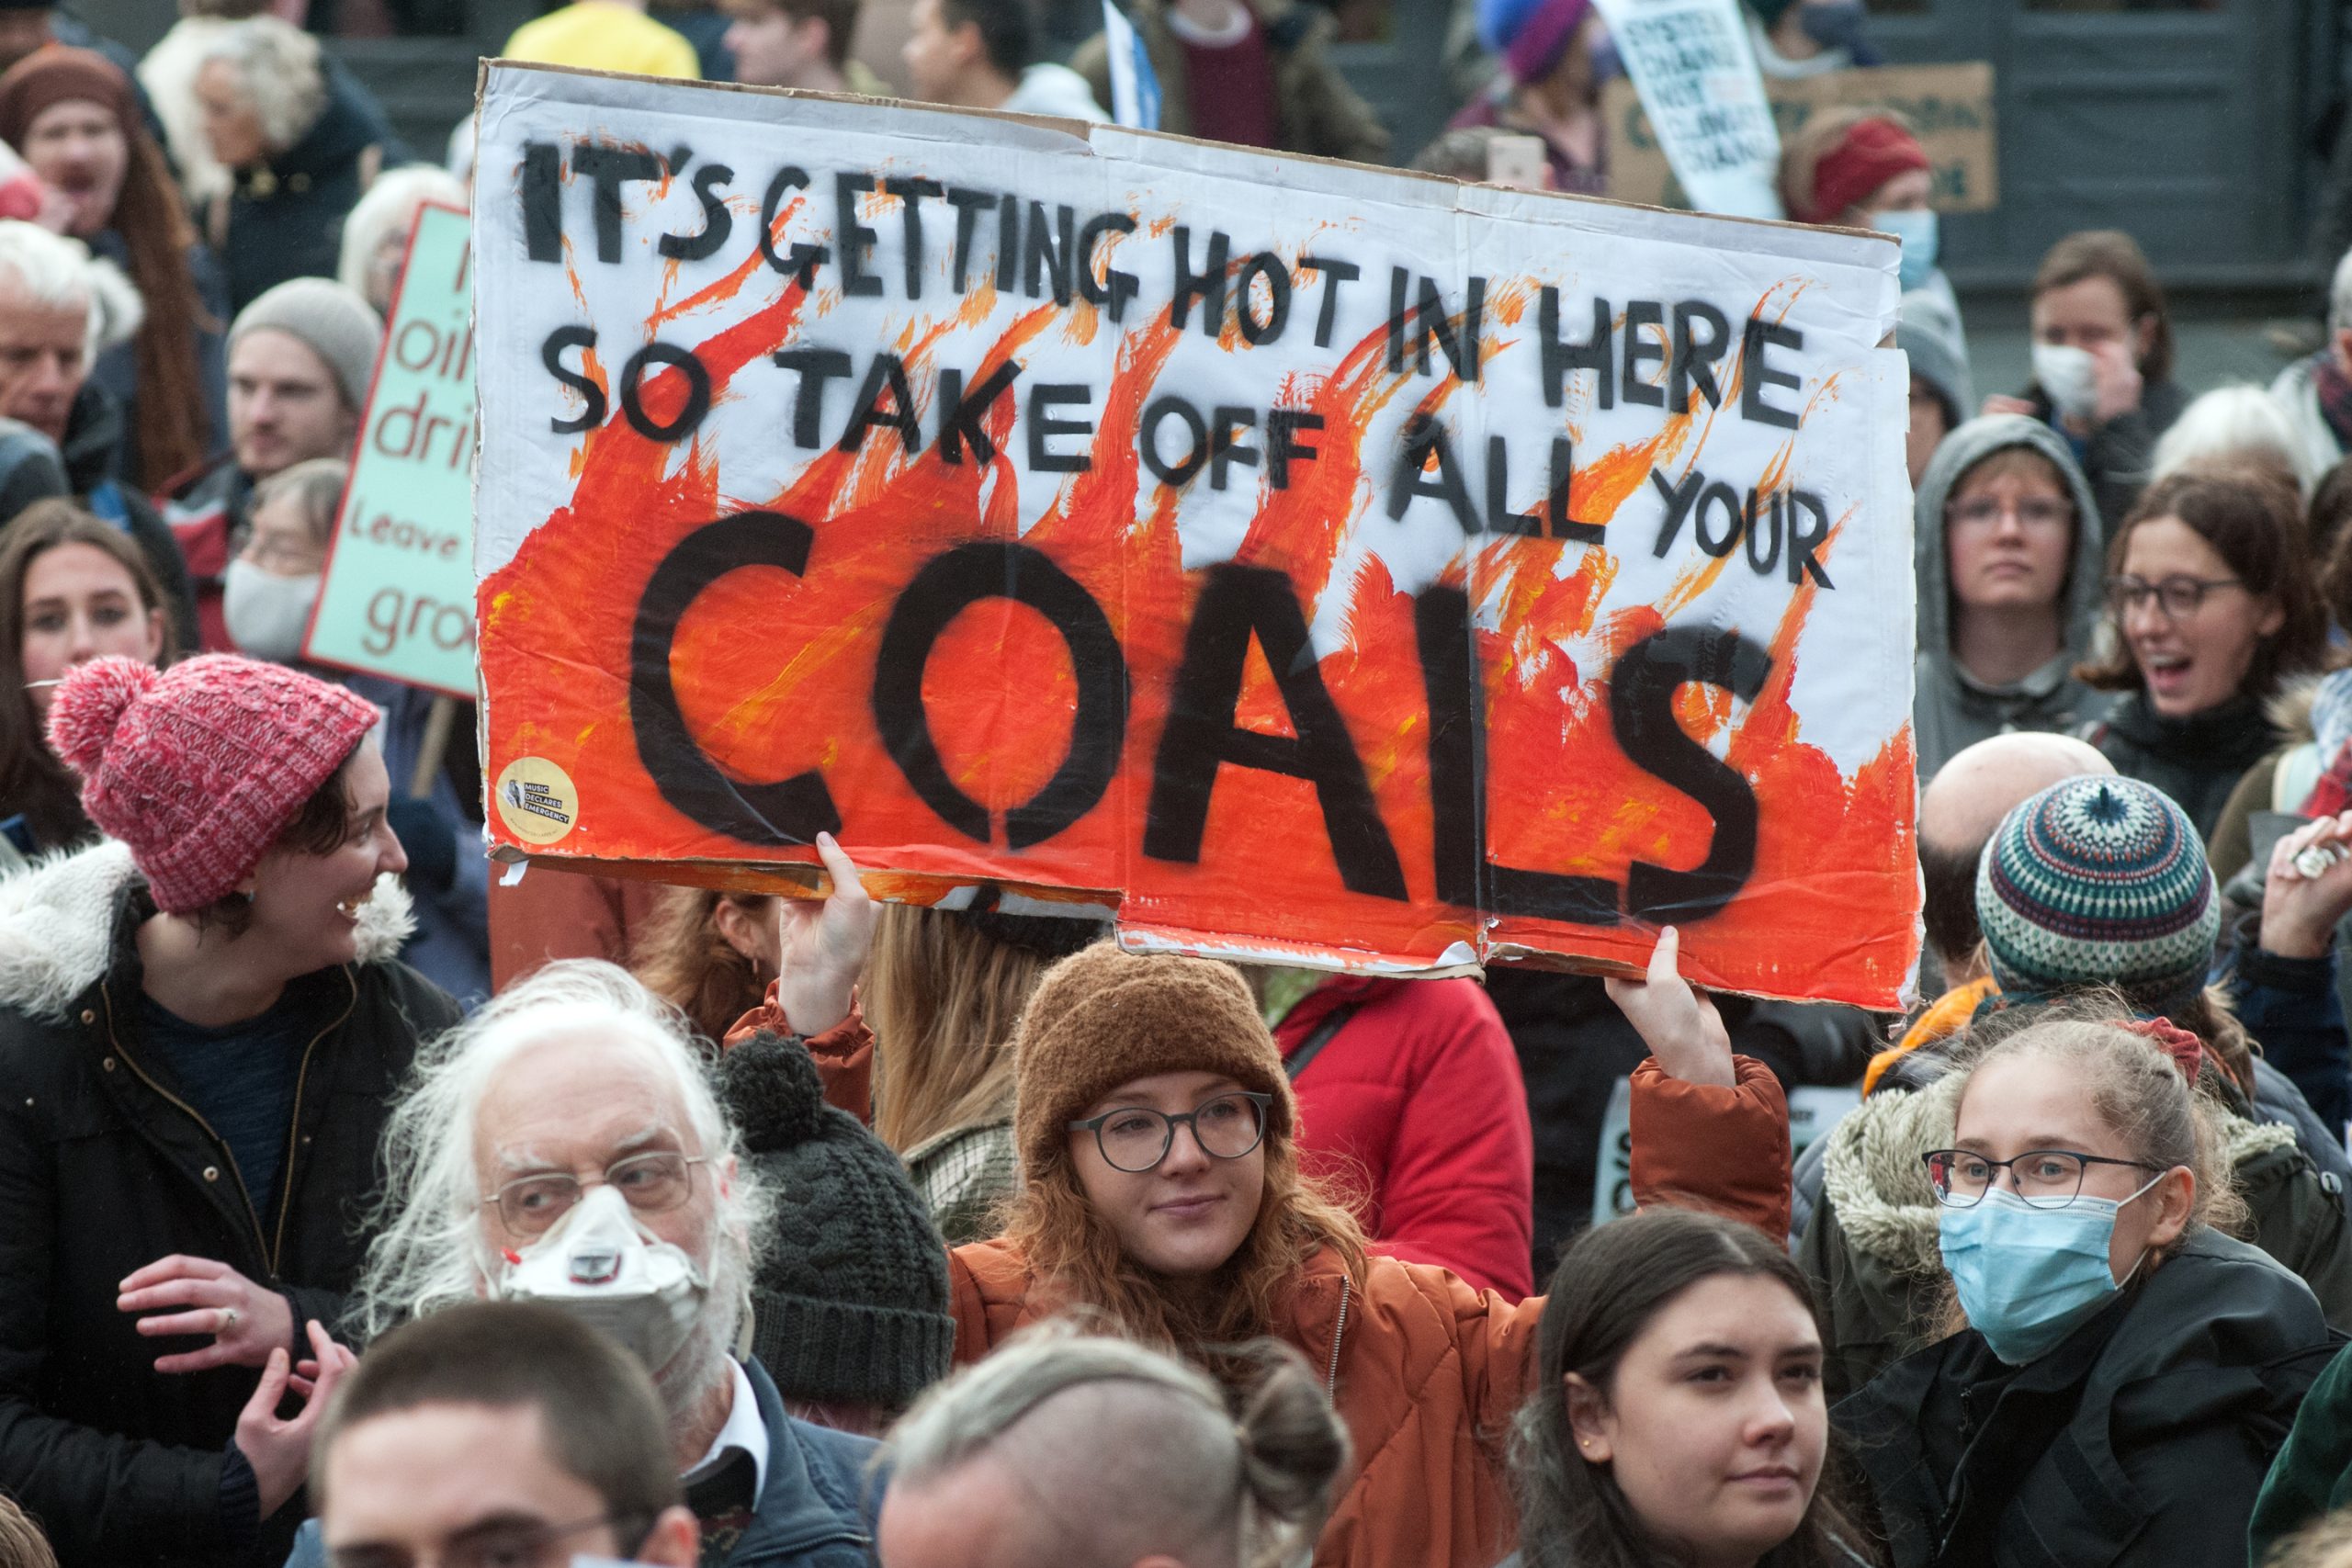 Demonstrators, one of them holding a sign saying "It's getting hot in here so take off all your coals".